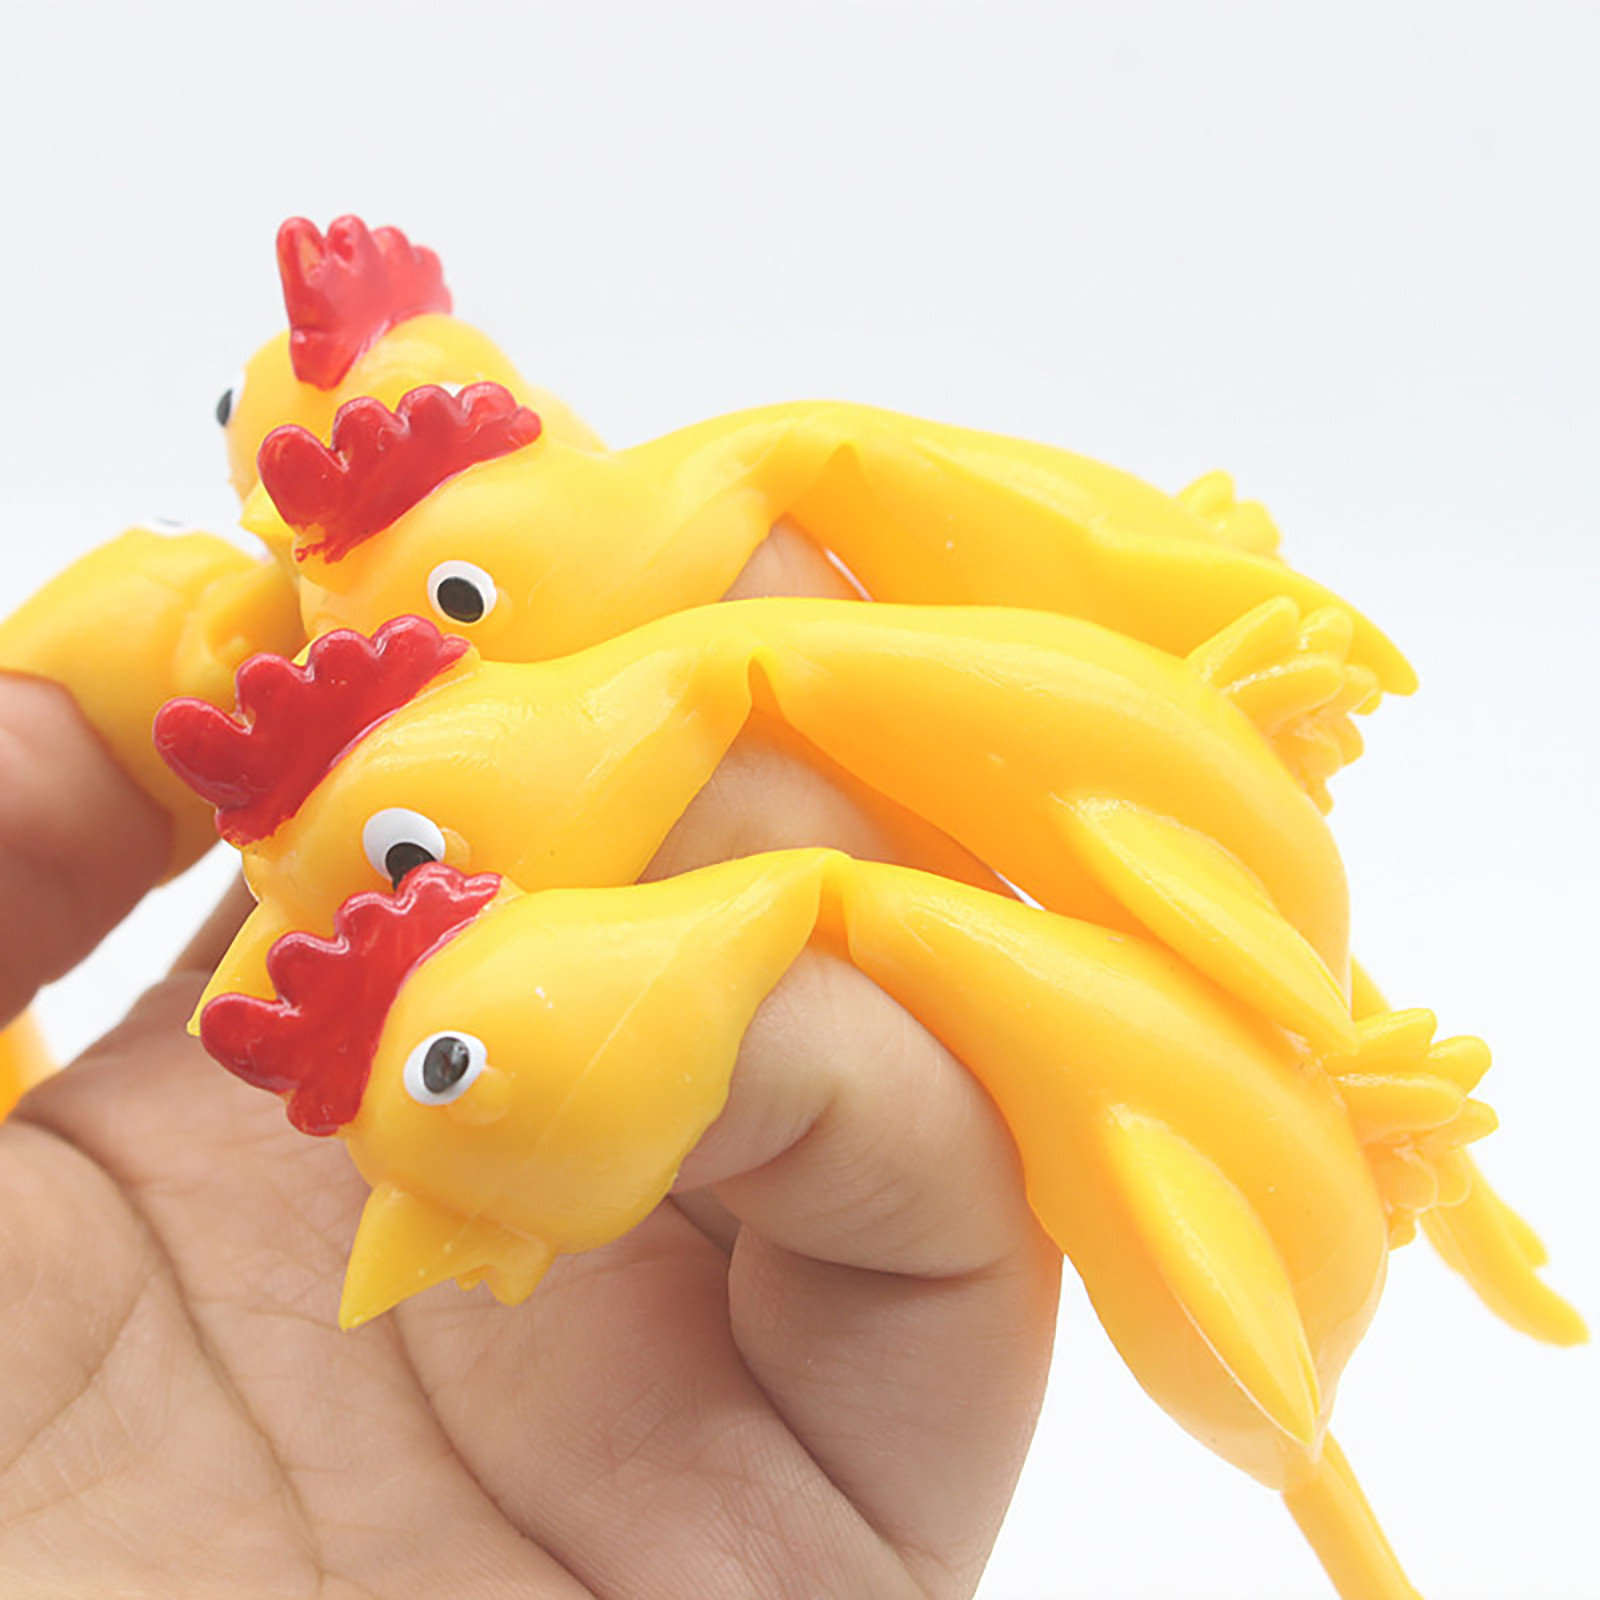 2-10 PCS Creative Ejection Chicken Toy Light Rubber Finger Prank Flying Toy 